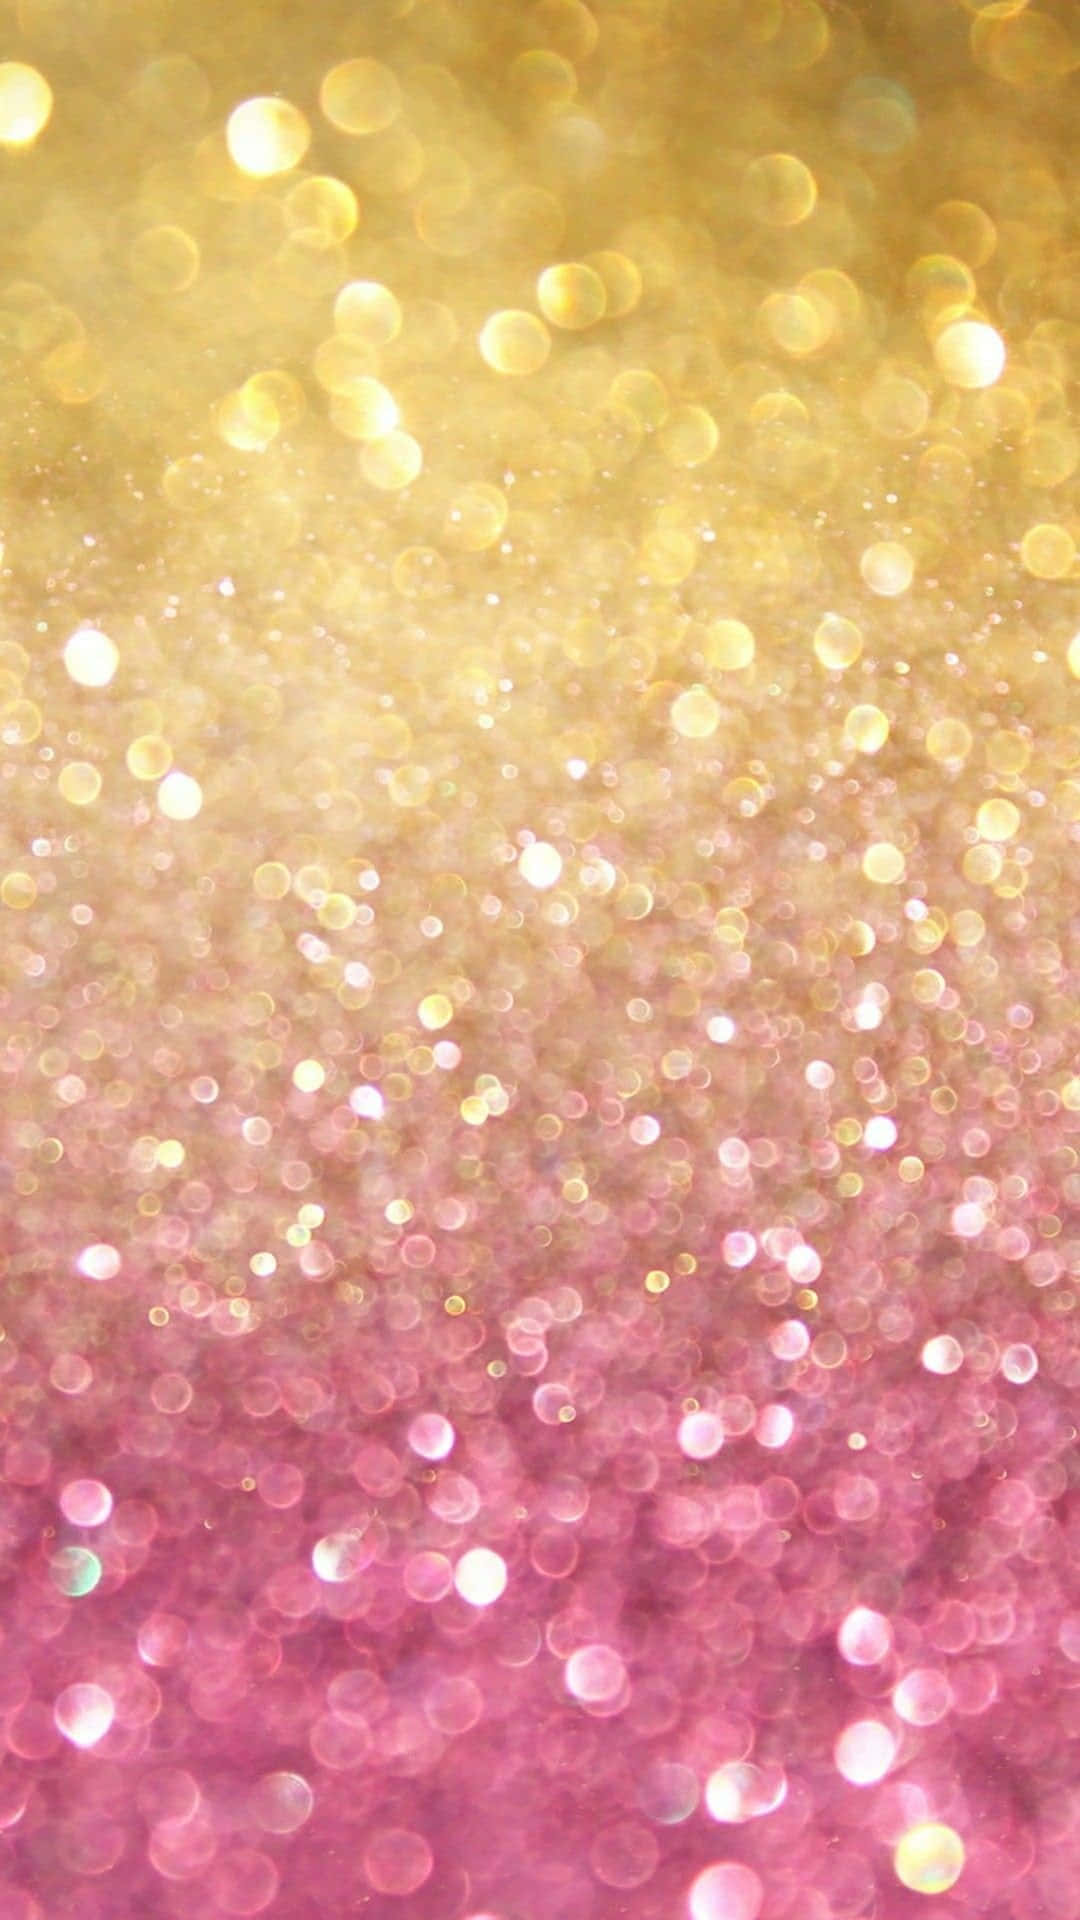 Shine Brightly with Sparkly Background